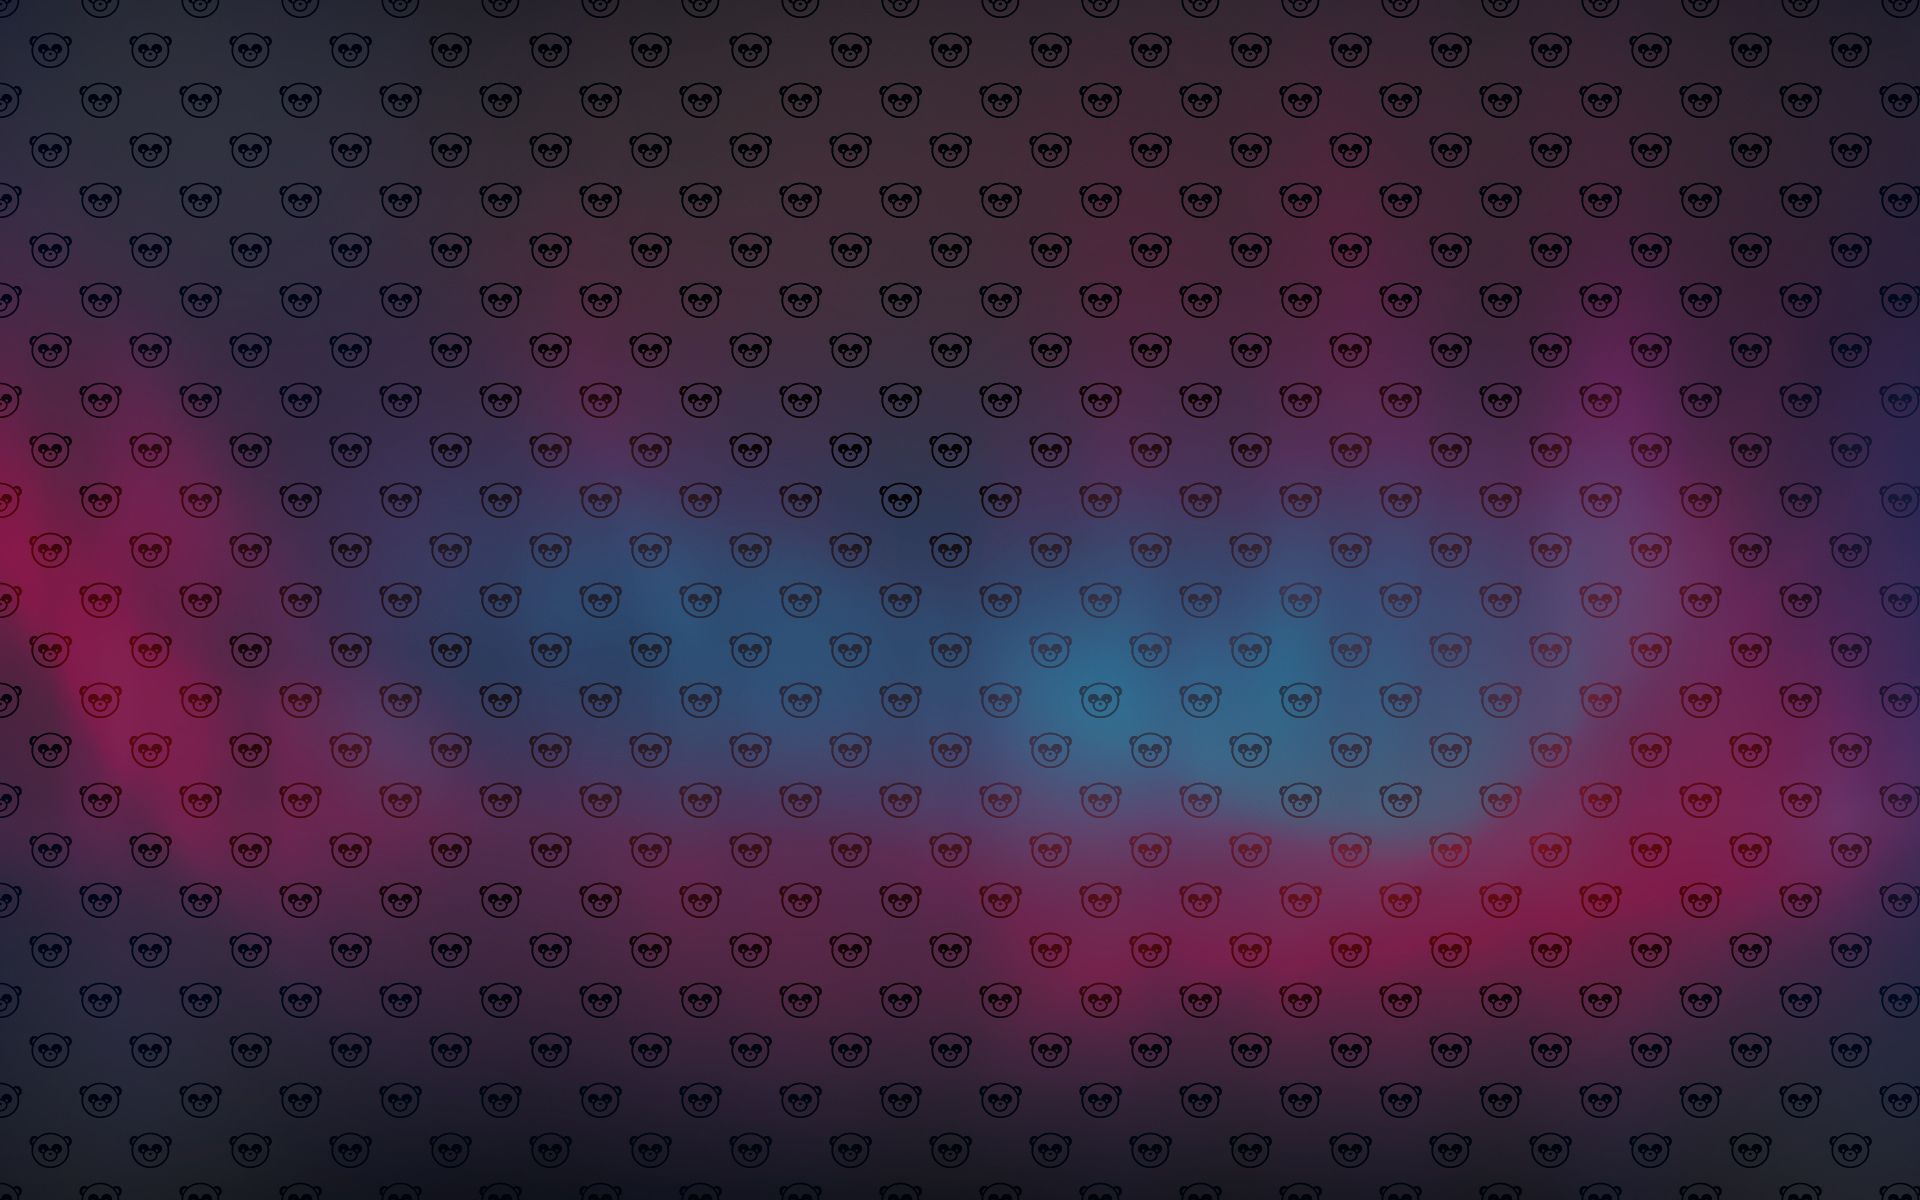 Skulls wallpaper with a colorful background - 1920x1200